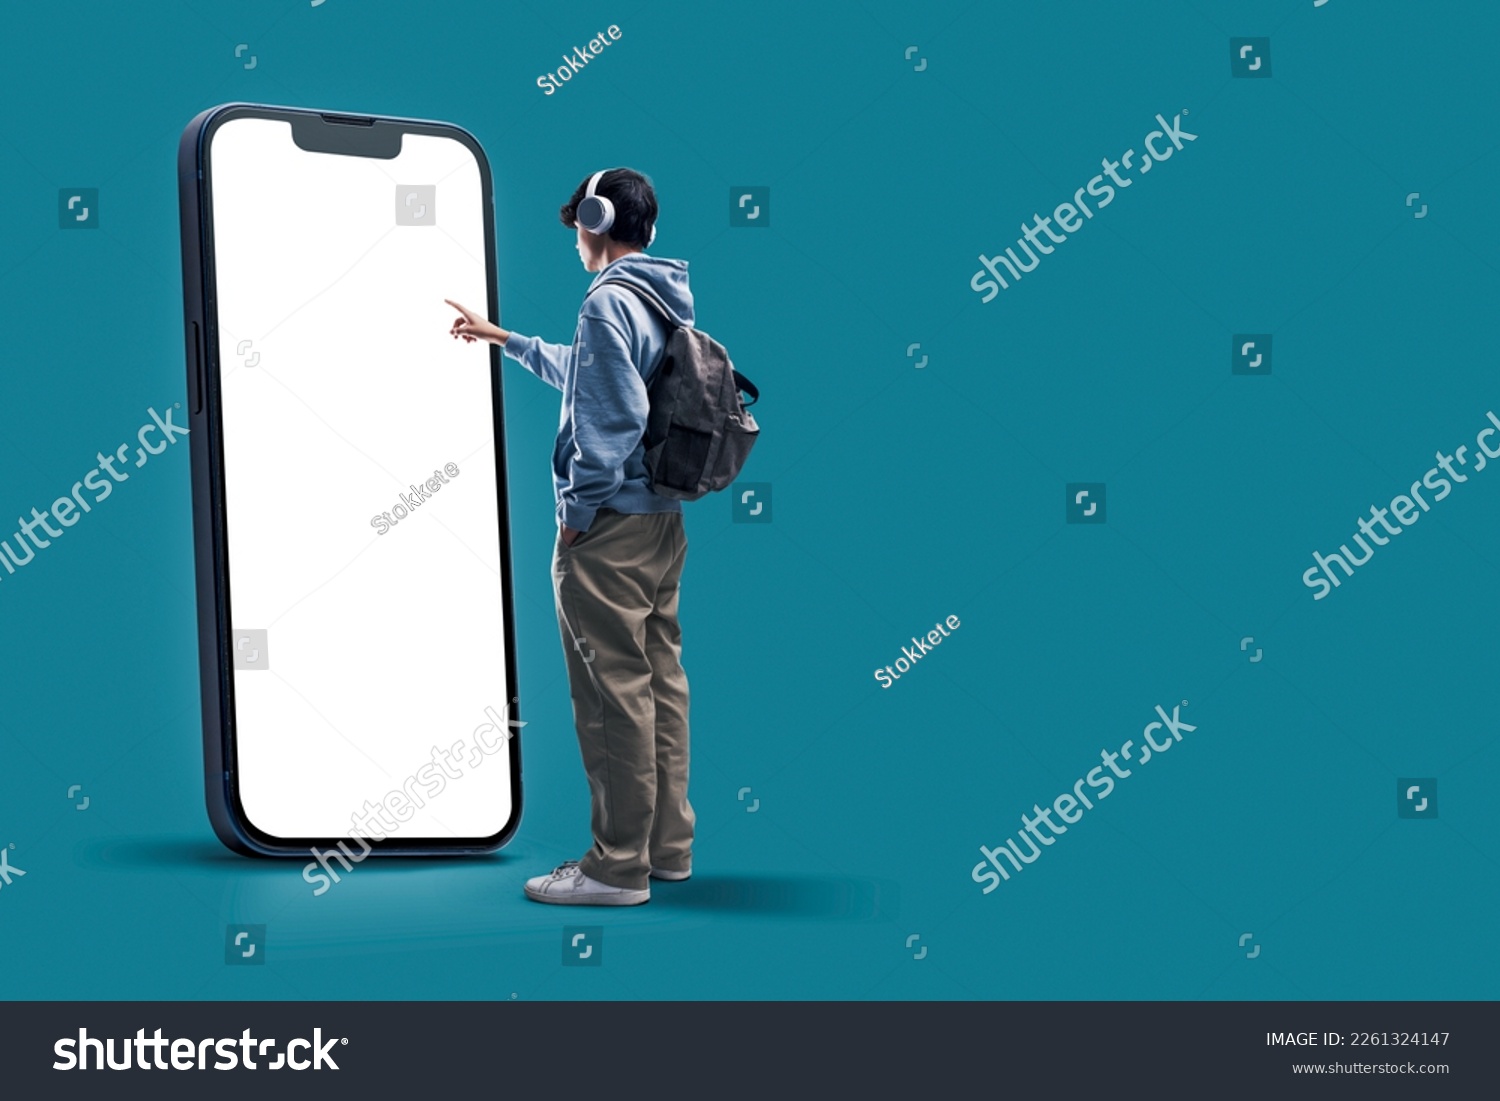 Student interacting with a big touch screen smartphone with blank display, online learning and mobile apps concept, copy space #2261324147